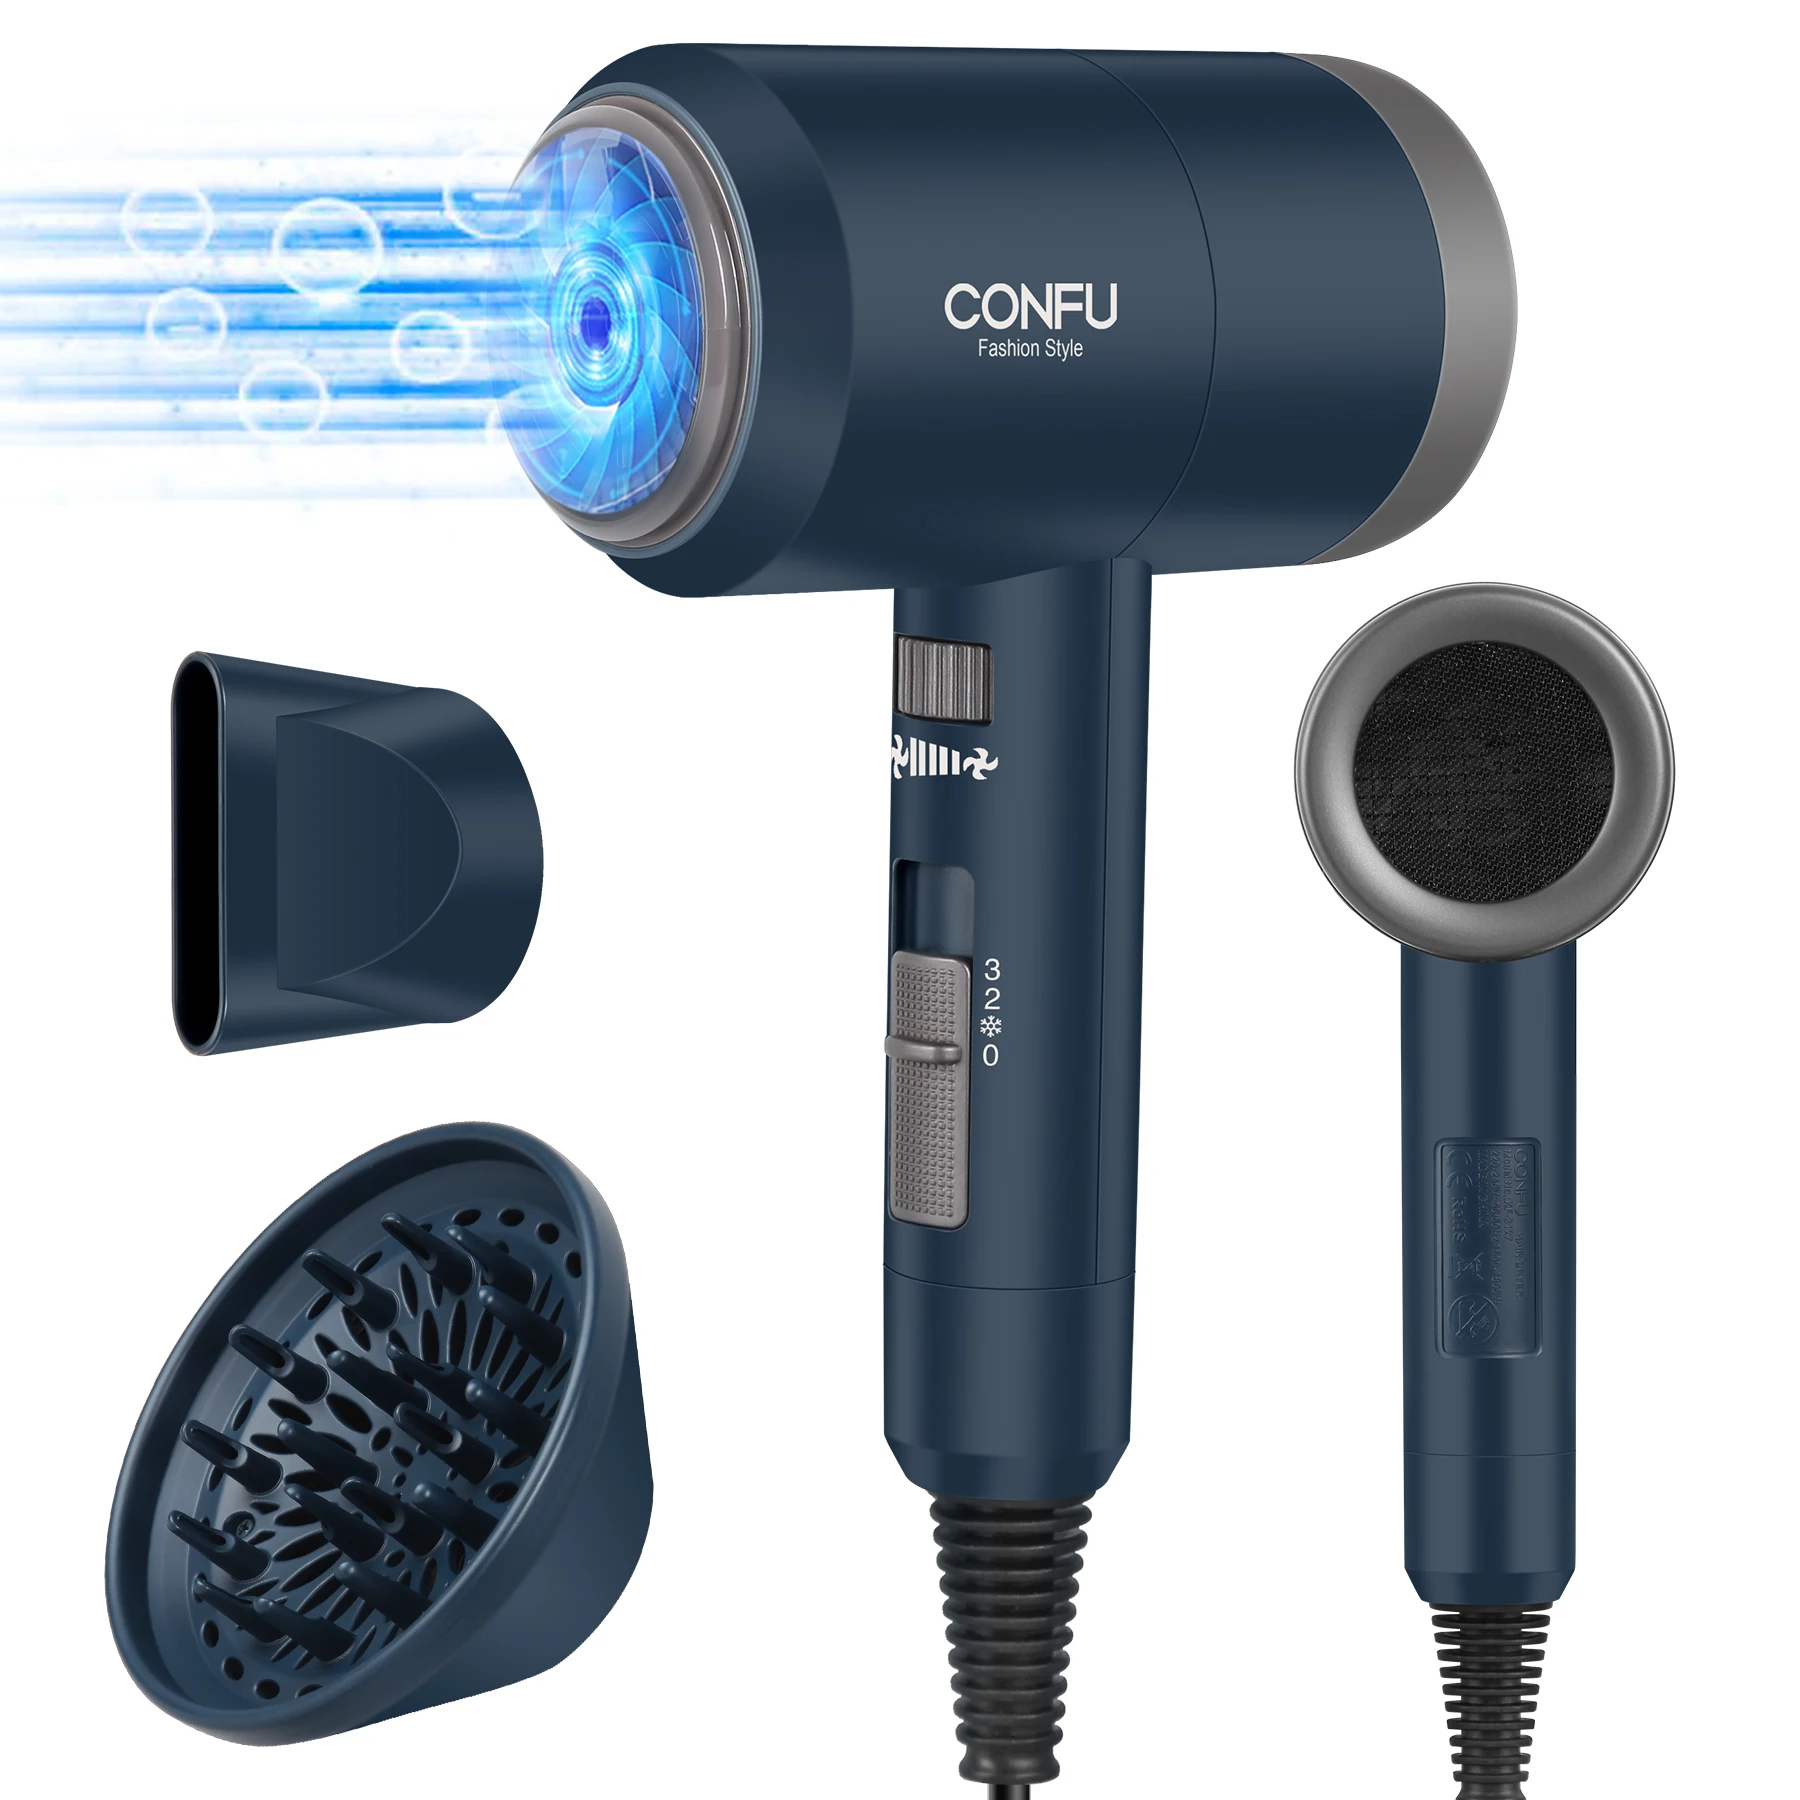 

CONFU 1800W Ionic Hair Dryer Portable Lightweight Blow Dryer Powerful Hair dryers Styling Tools for Travel Salon Household Use